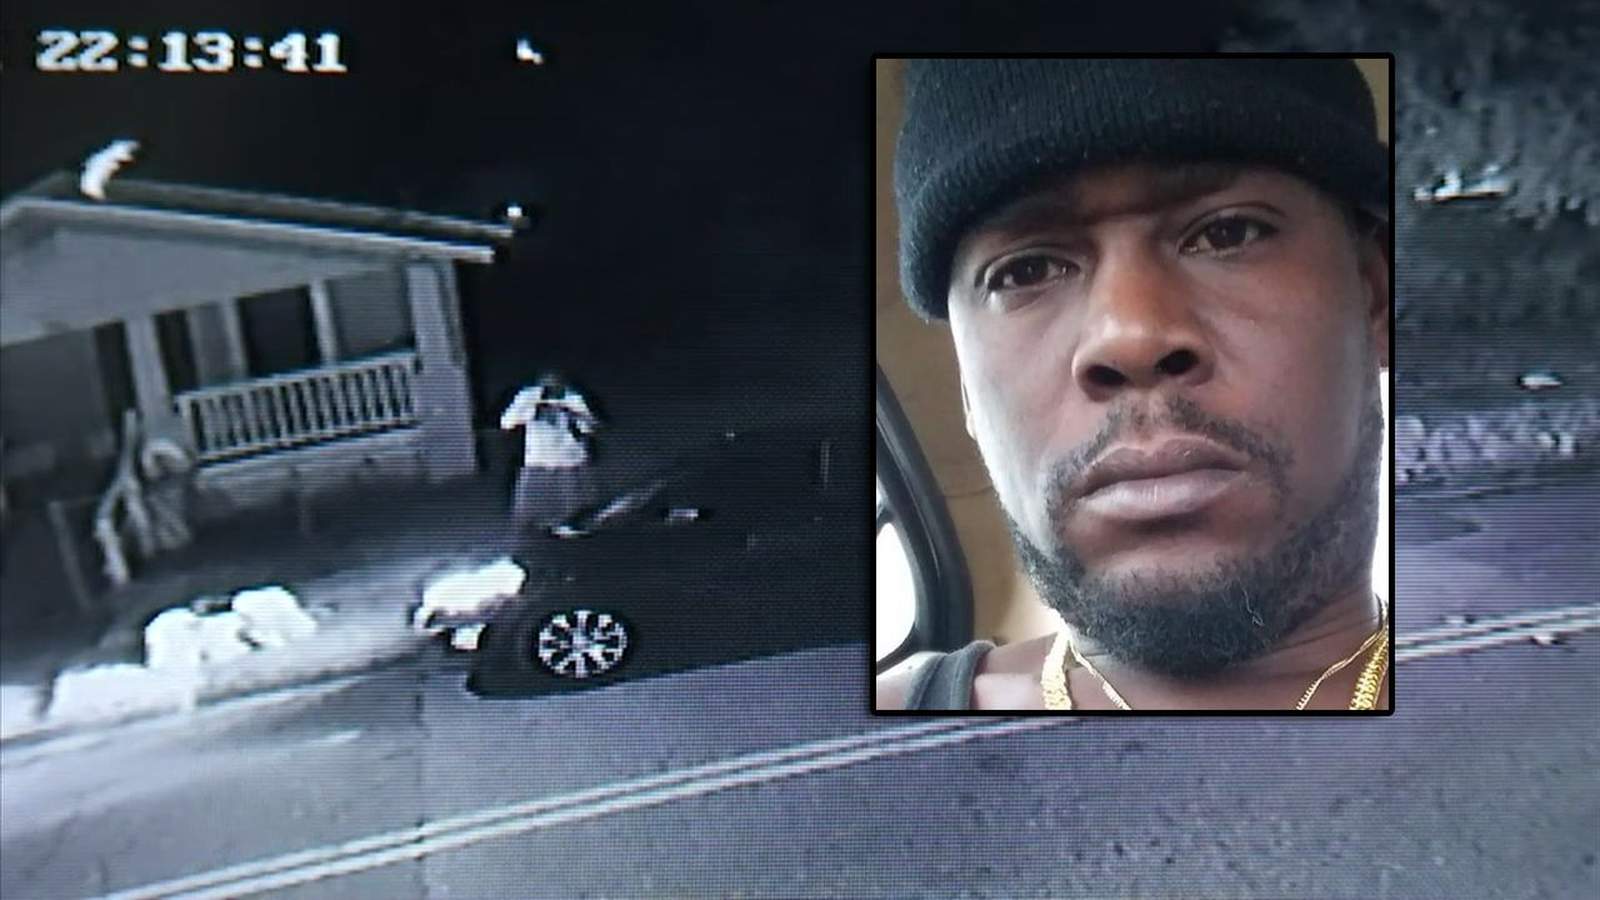 Surveillance video captures deadly police shooting of rifle-wielding man